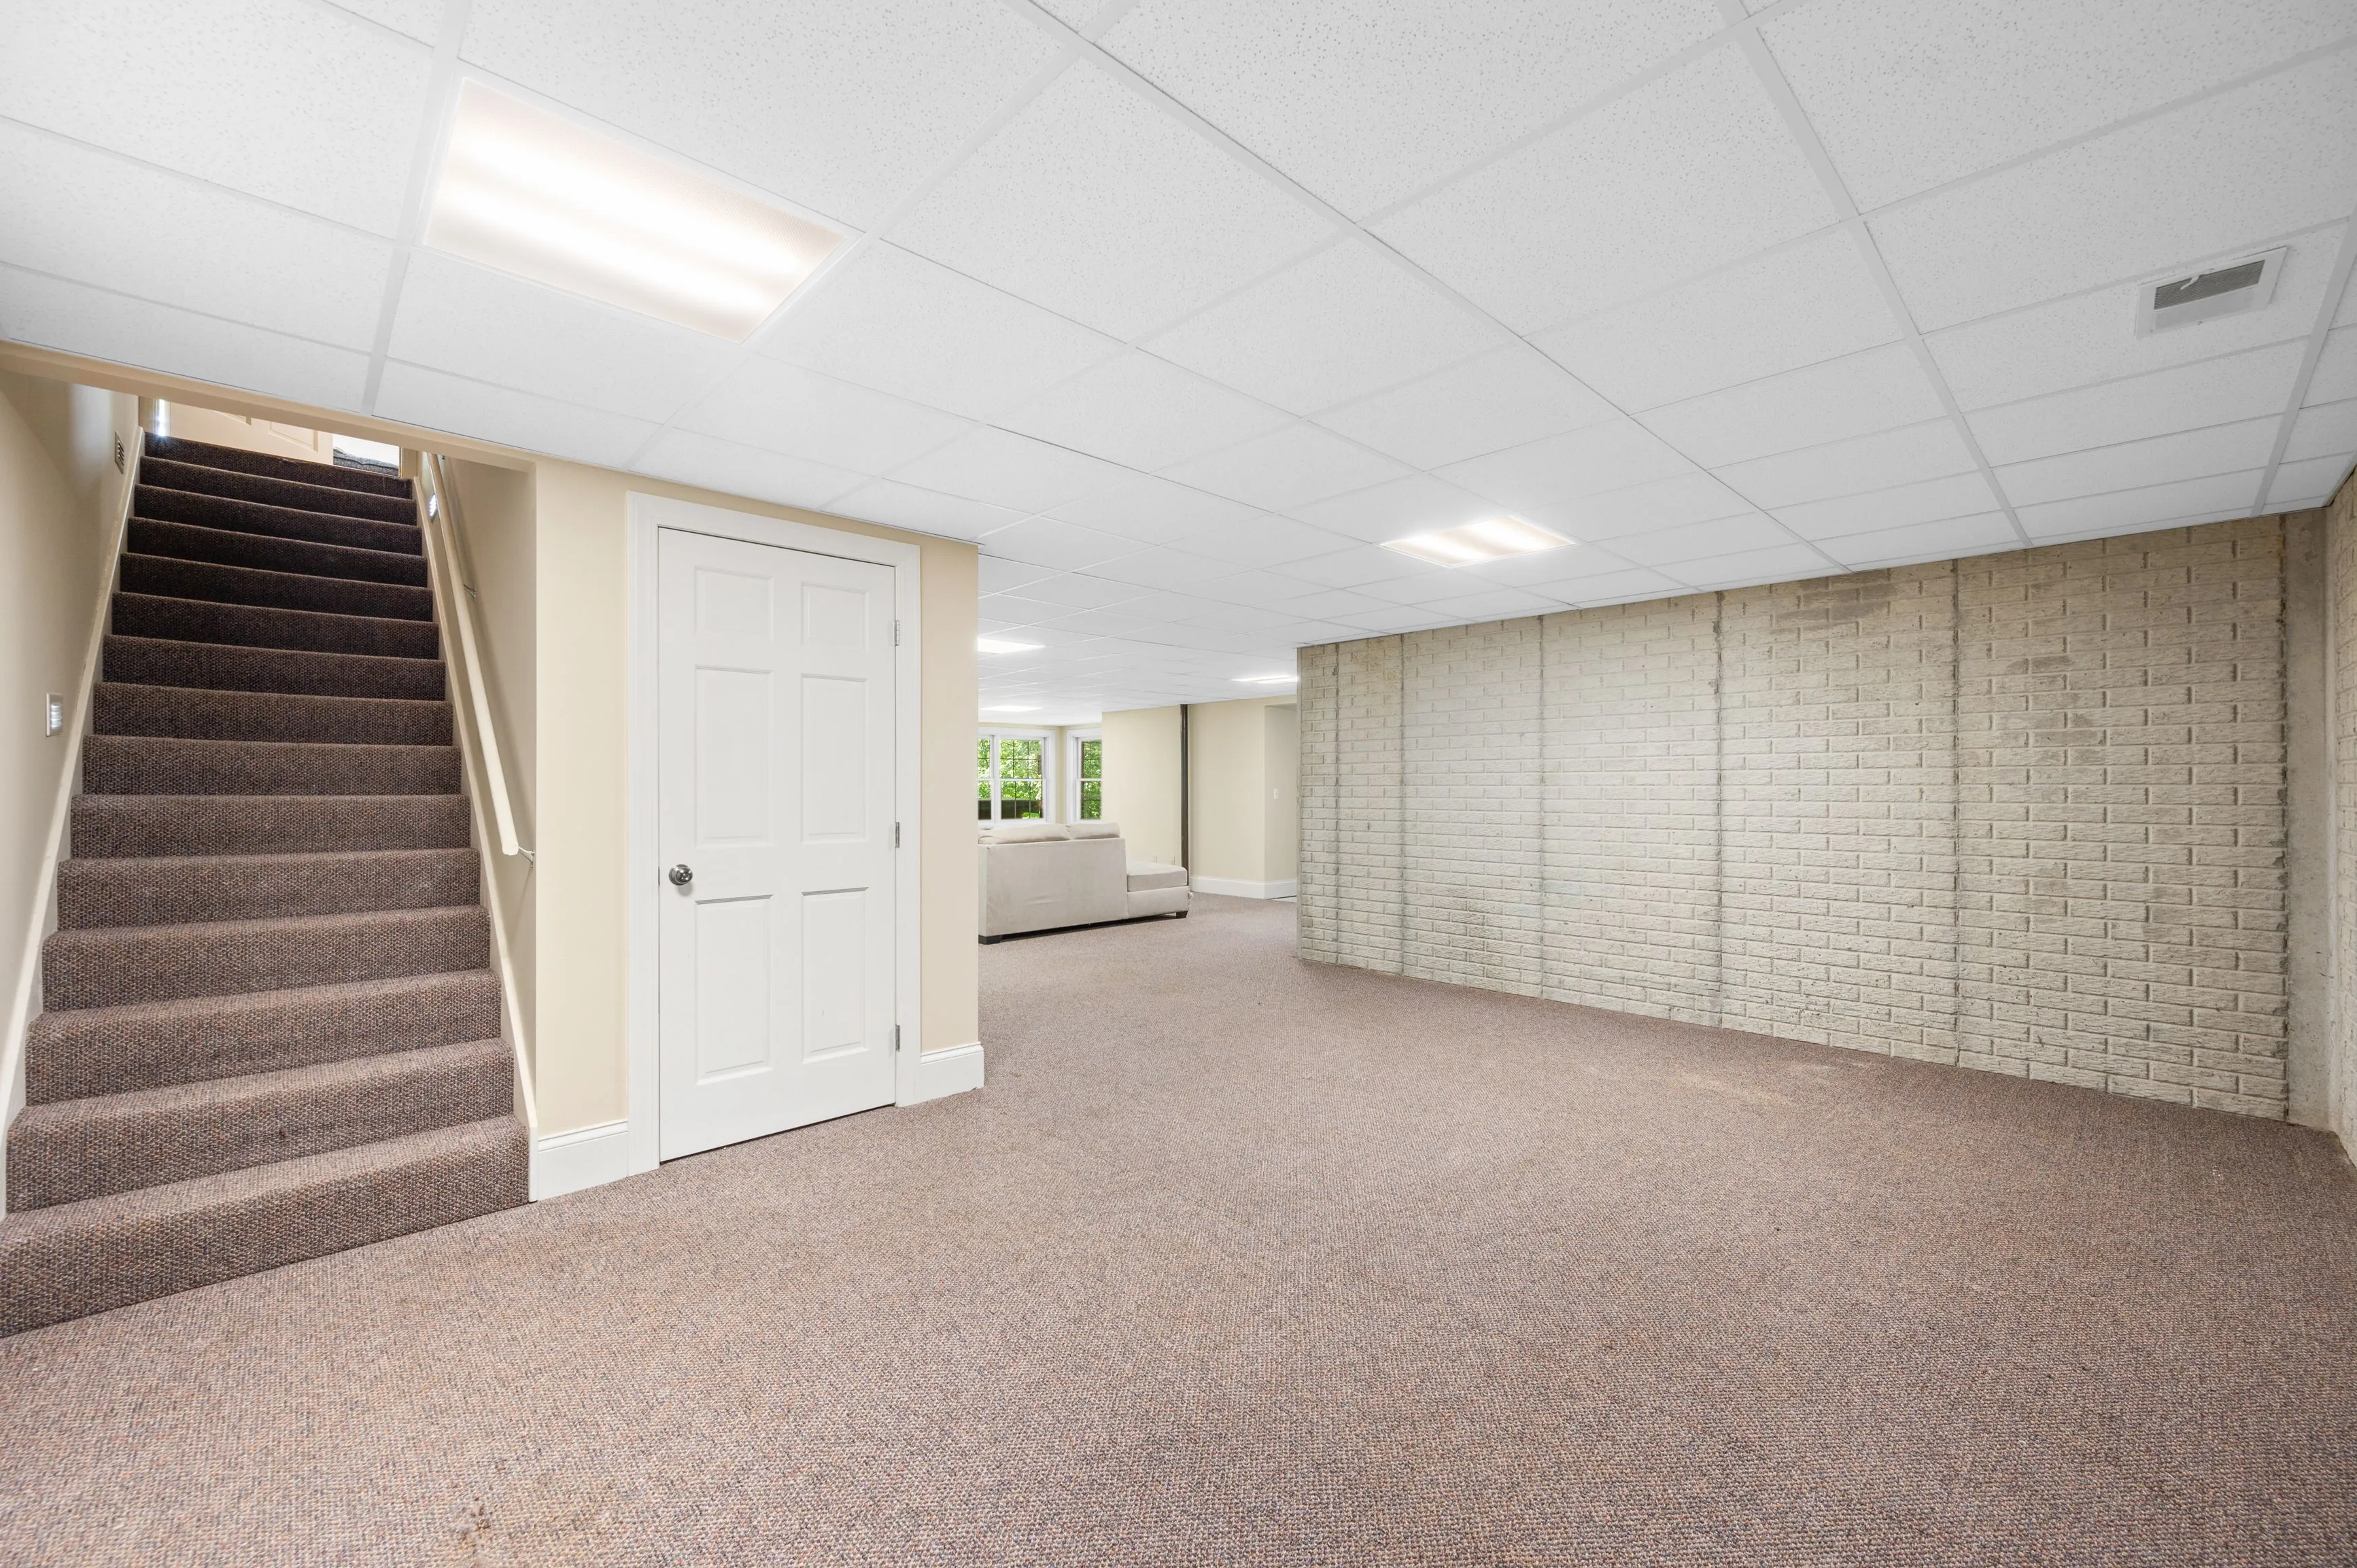 A spacious basement room with beige walls, carpeted floor, a white door, a set of stairs, and recessed lighting.